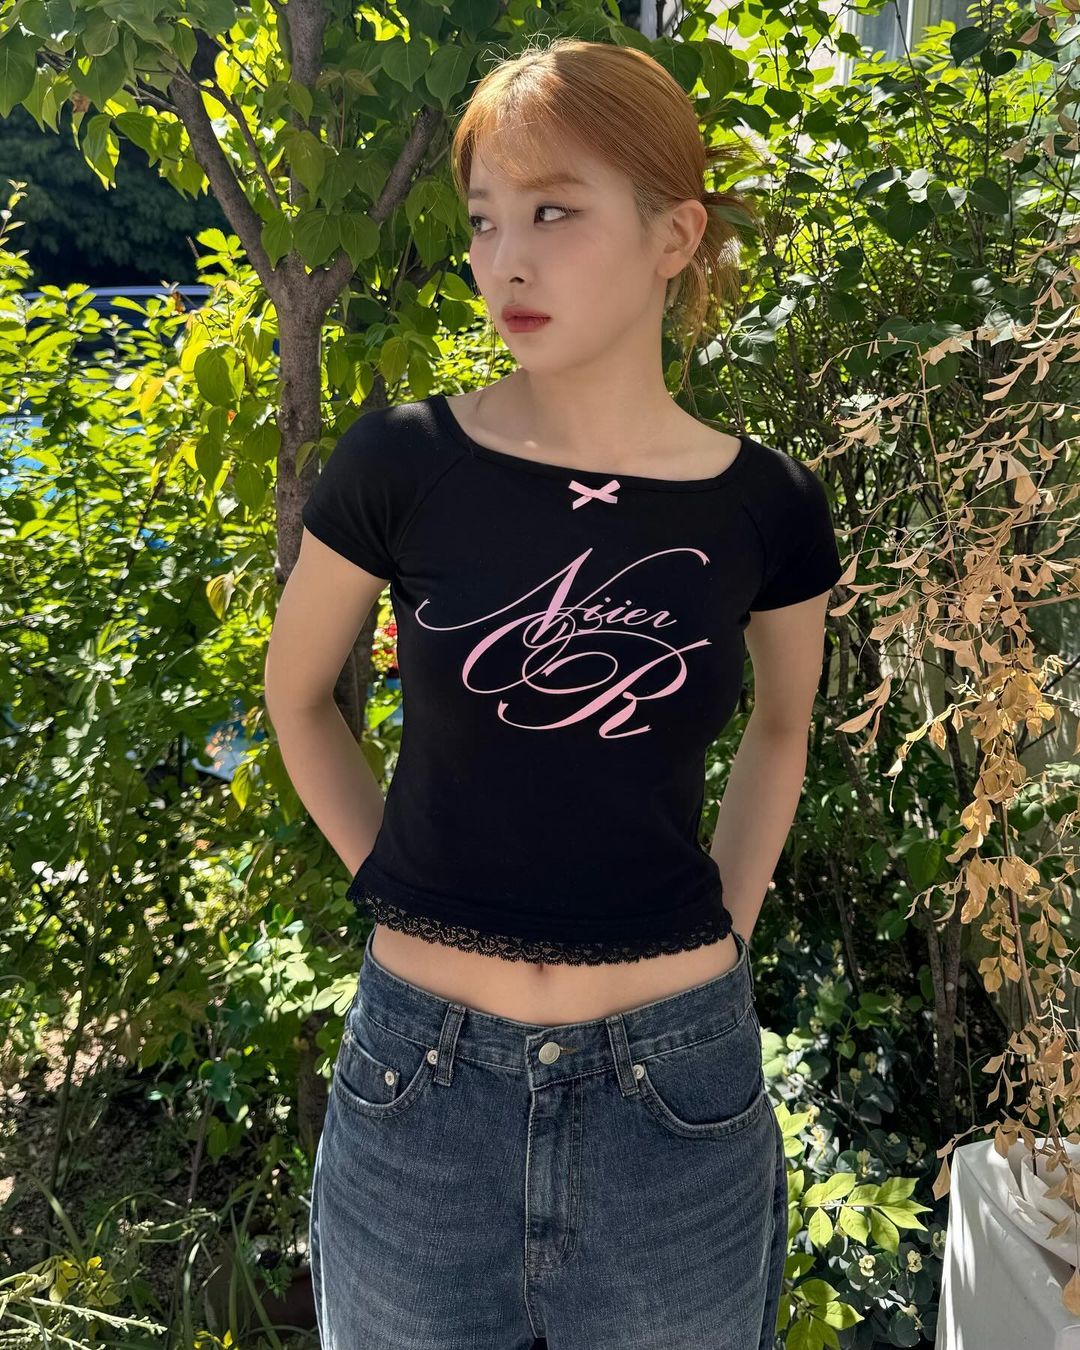 A sexy-looking black crop top with lace at the end. Red Velvet's Seulgi's sexy outfit